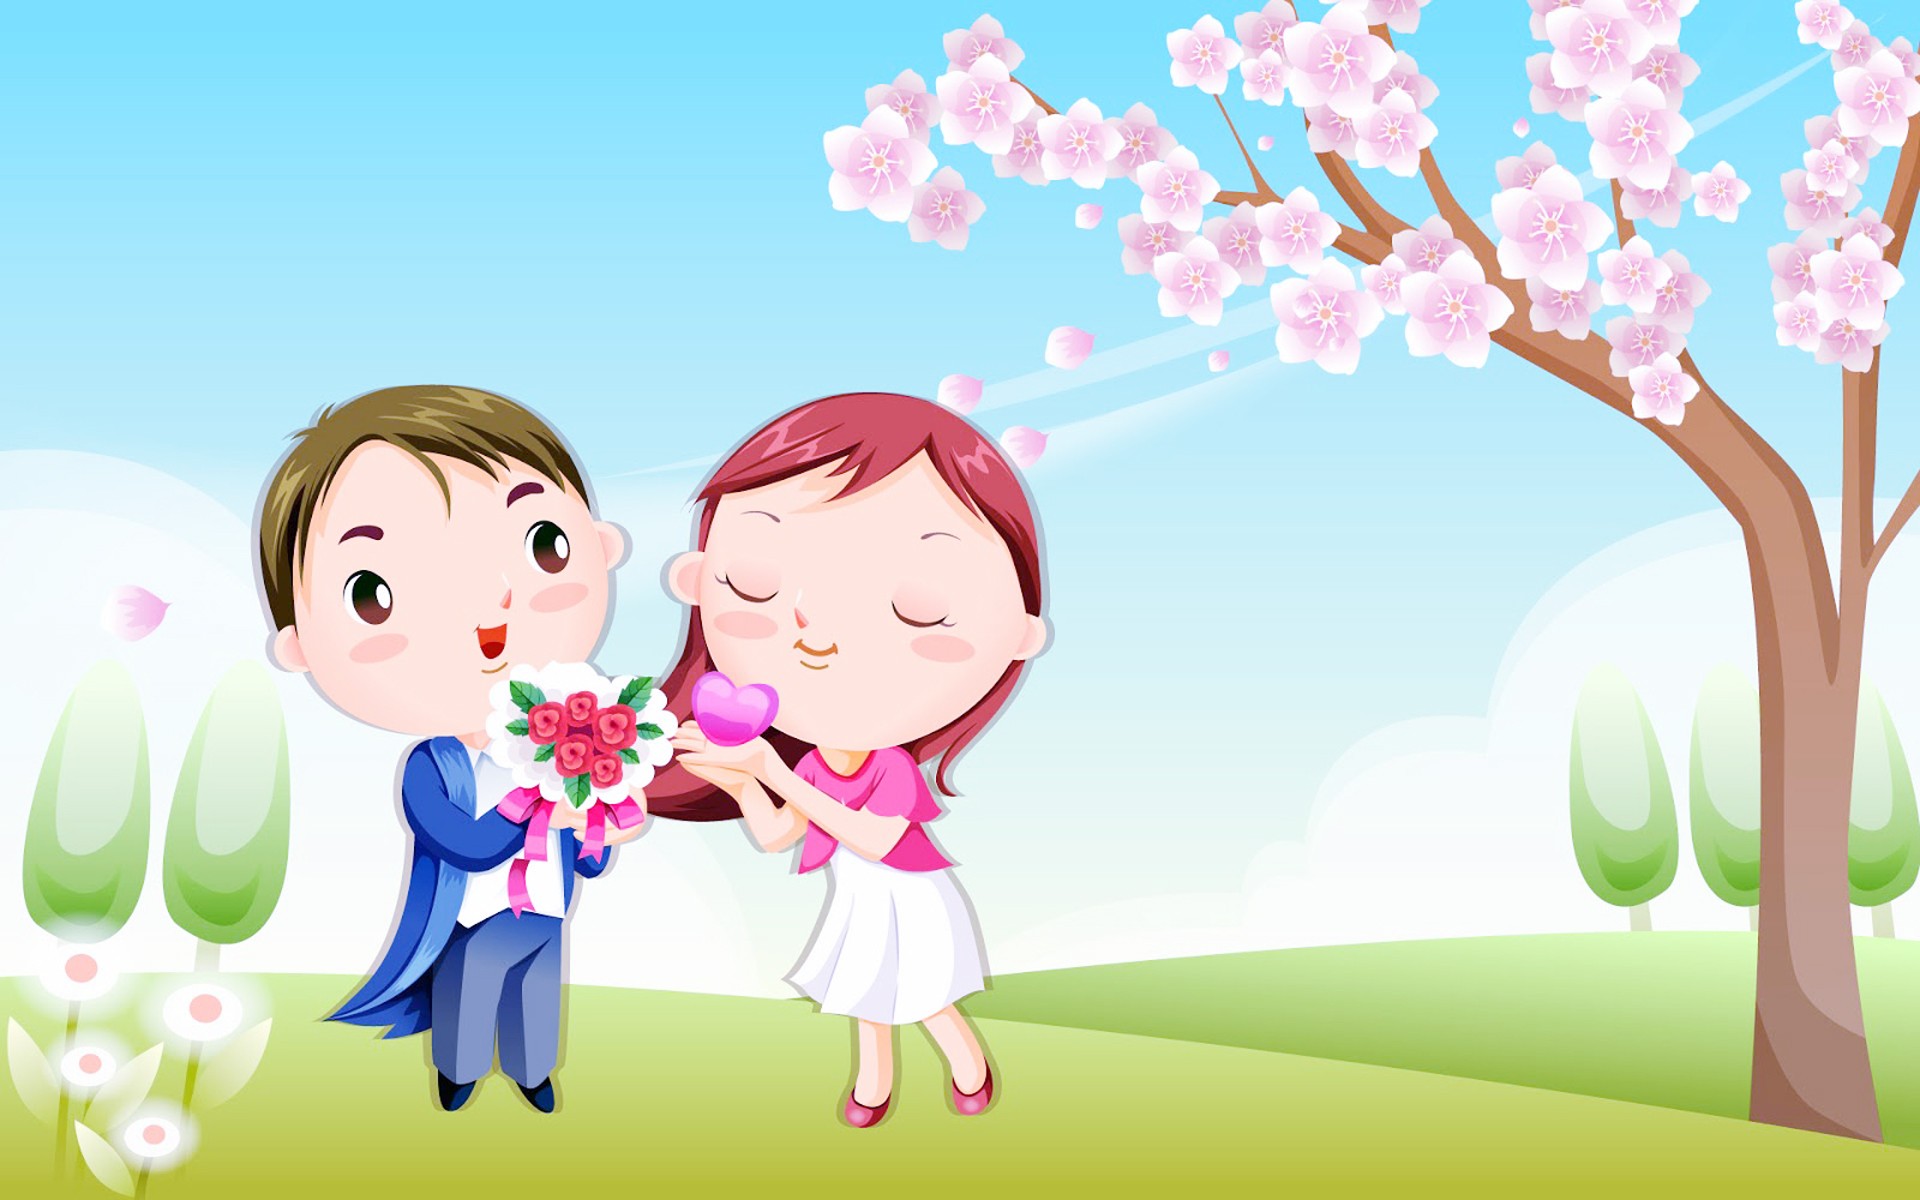 Happy Propose Day Wallpaper HD